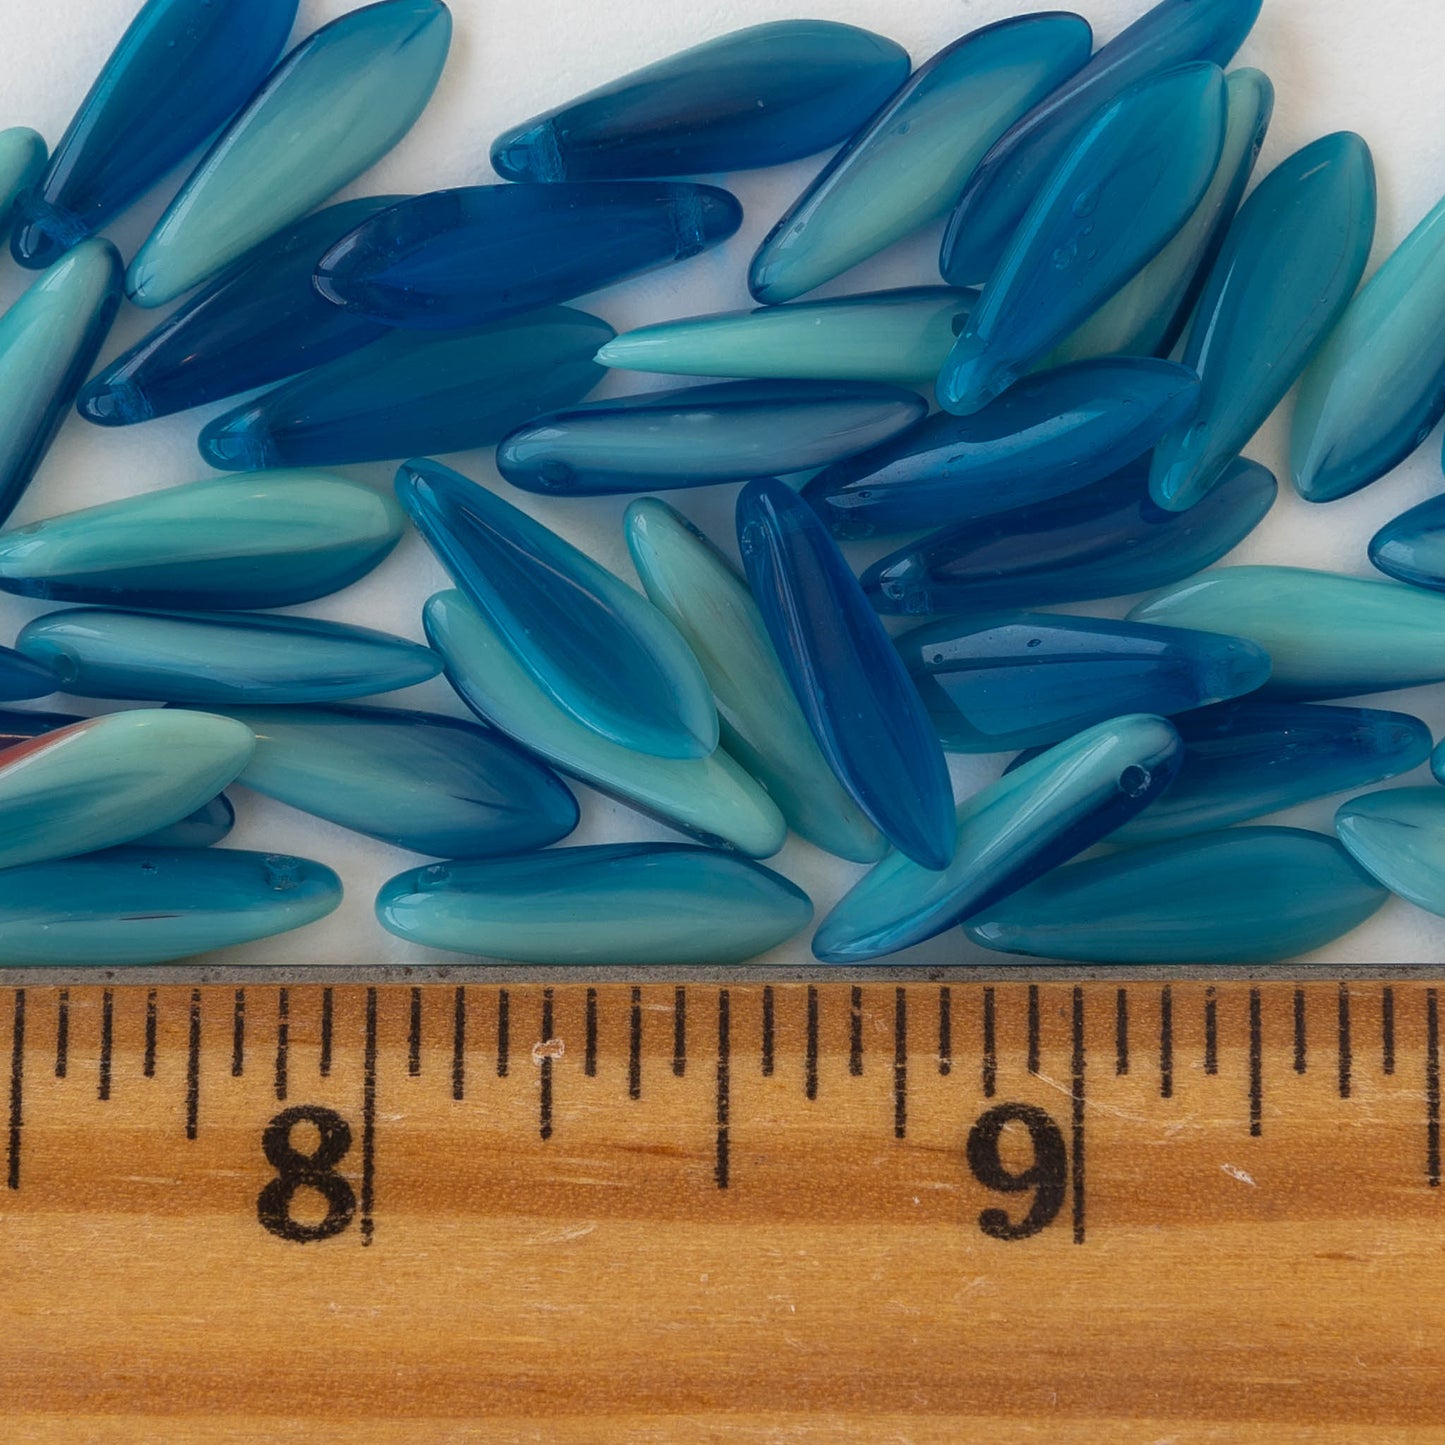 Load image into Gallery viewer, 16mm Dagger Beads - Blue Mixed Glass - 60 beads
